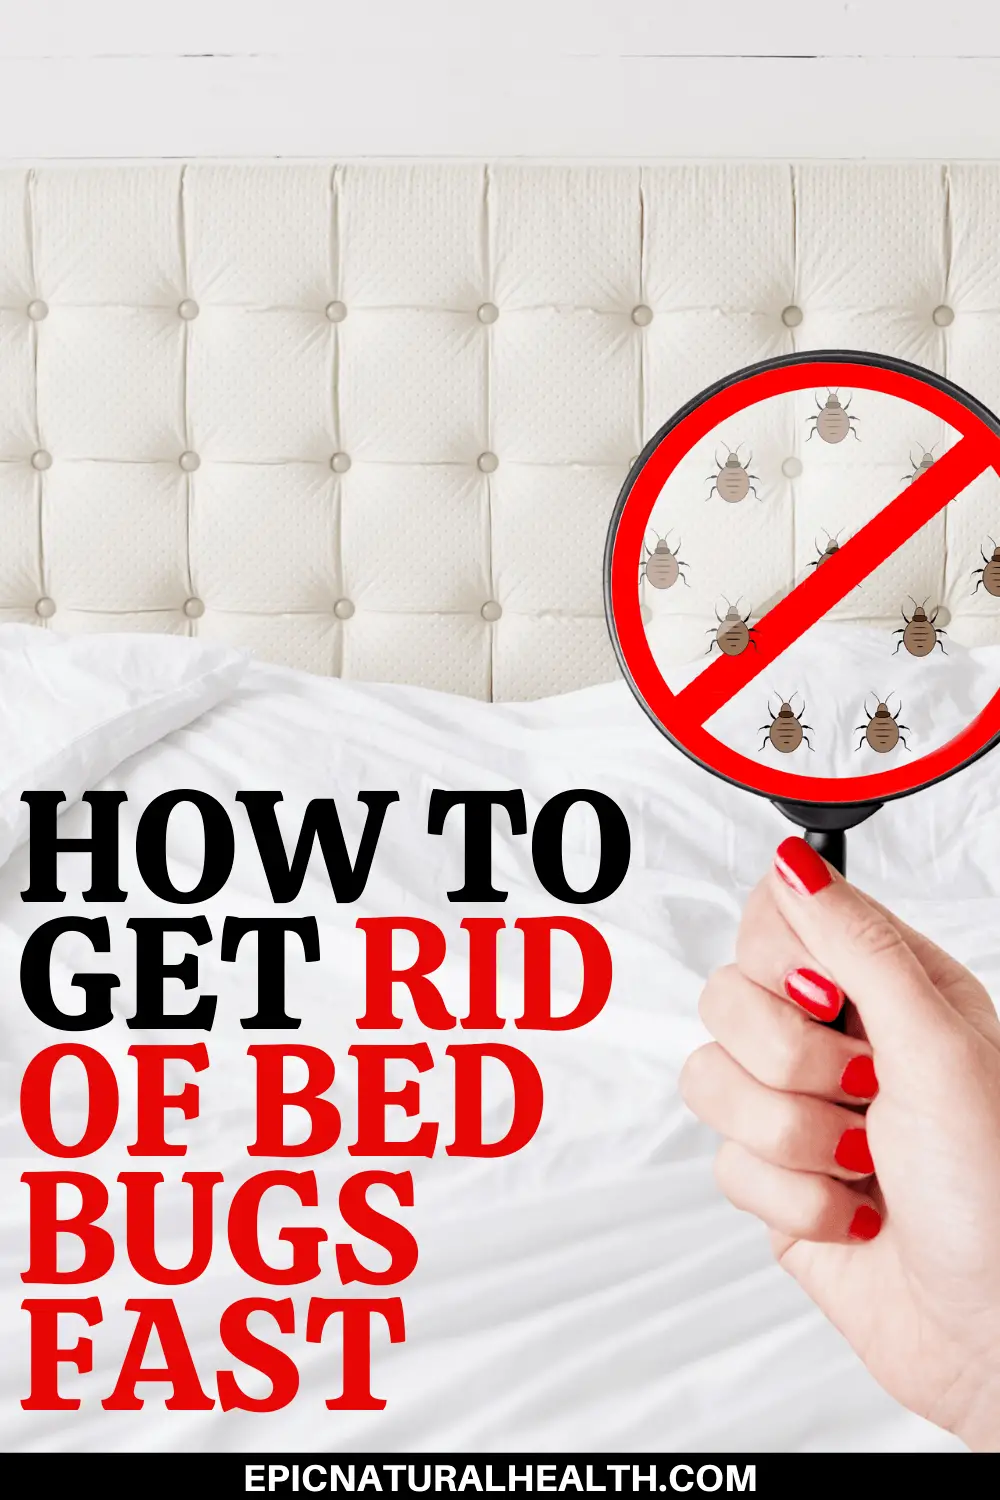 How to get rid of bed bugs fast